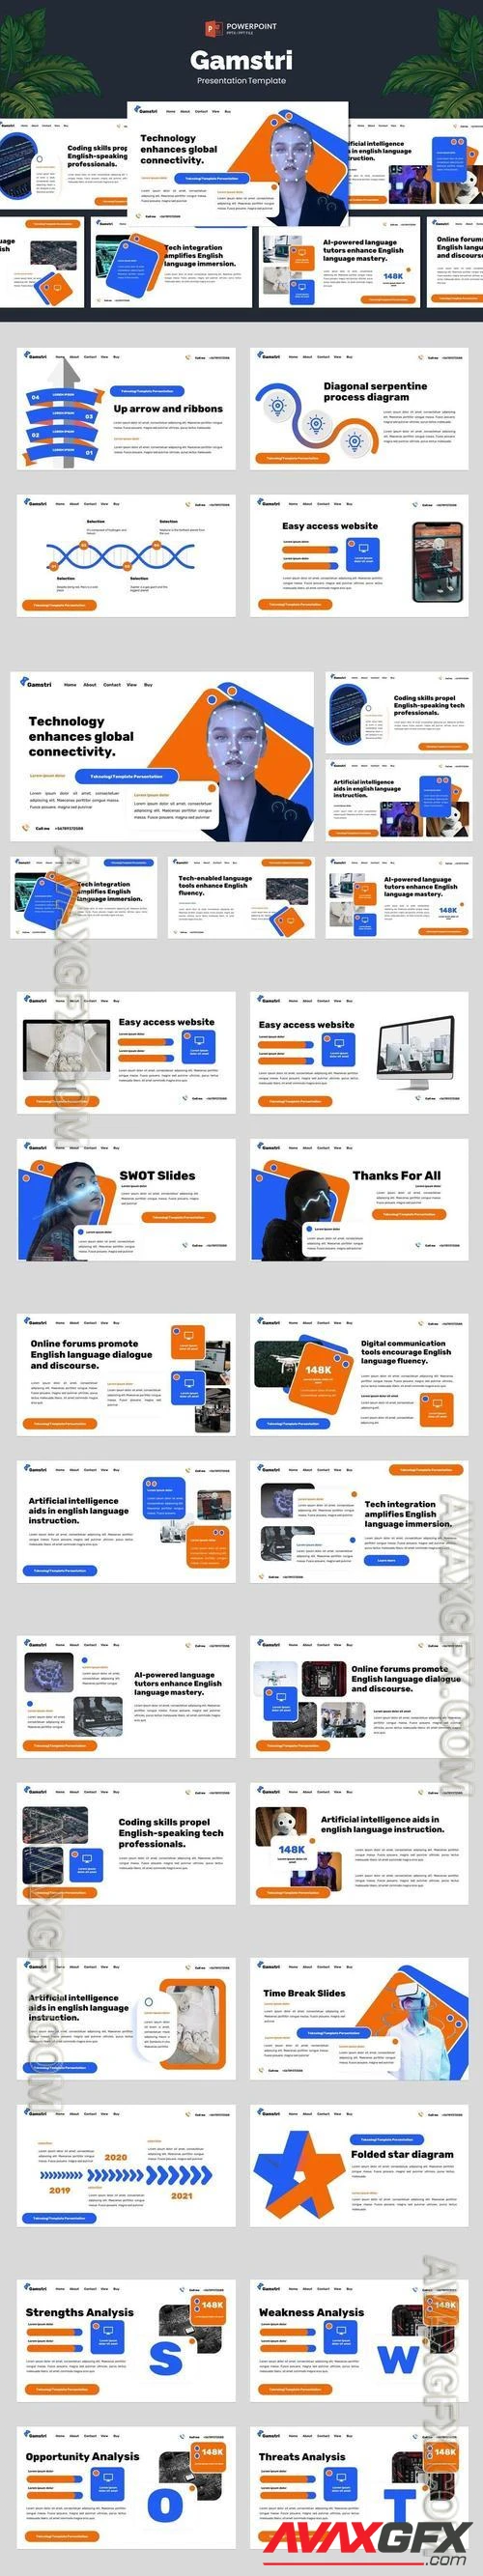 Gamstri - Technology AI Powerpoint Template